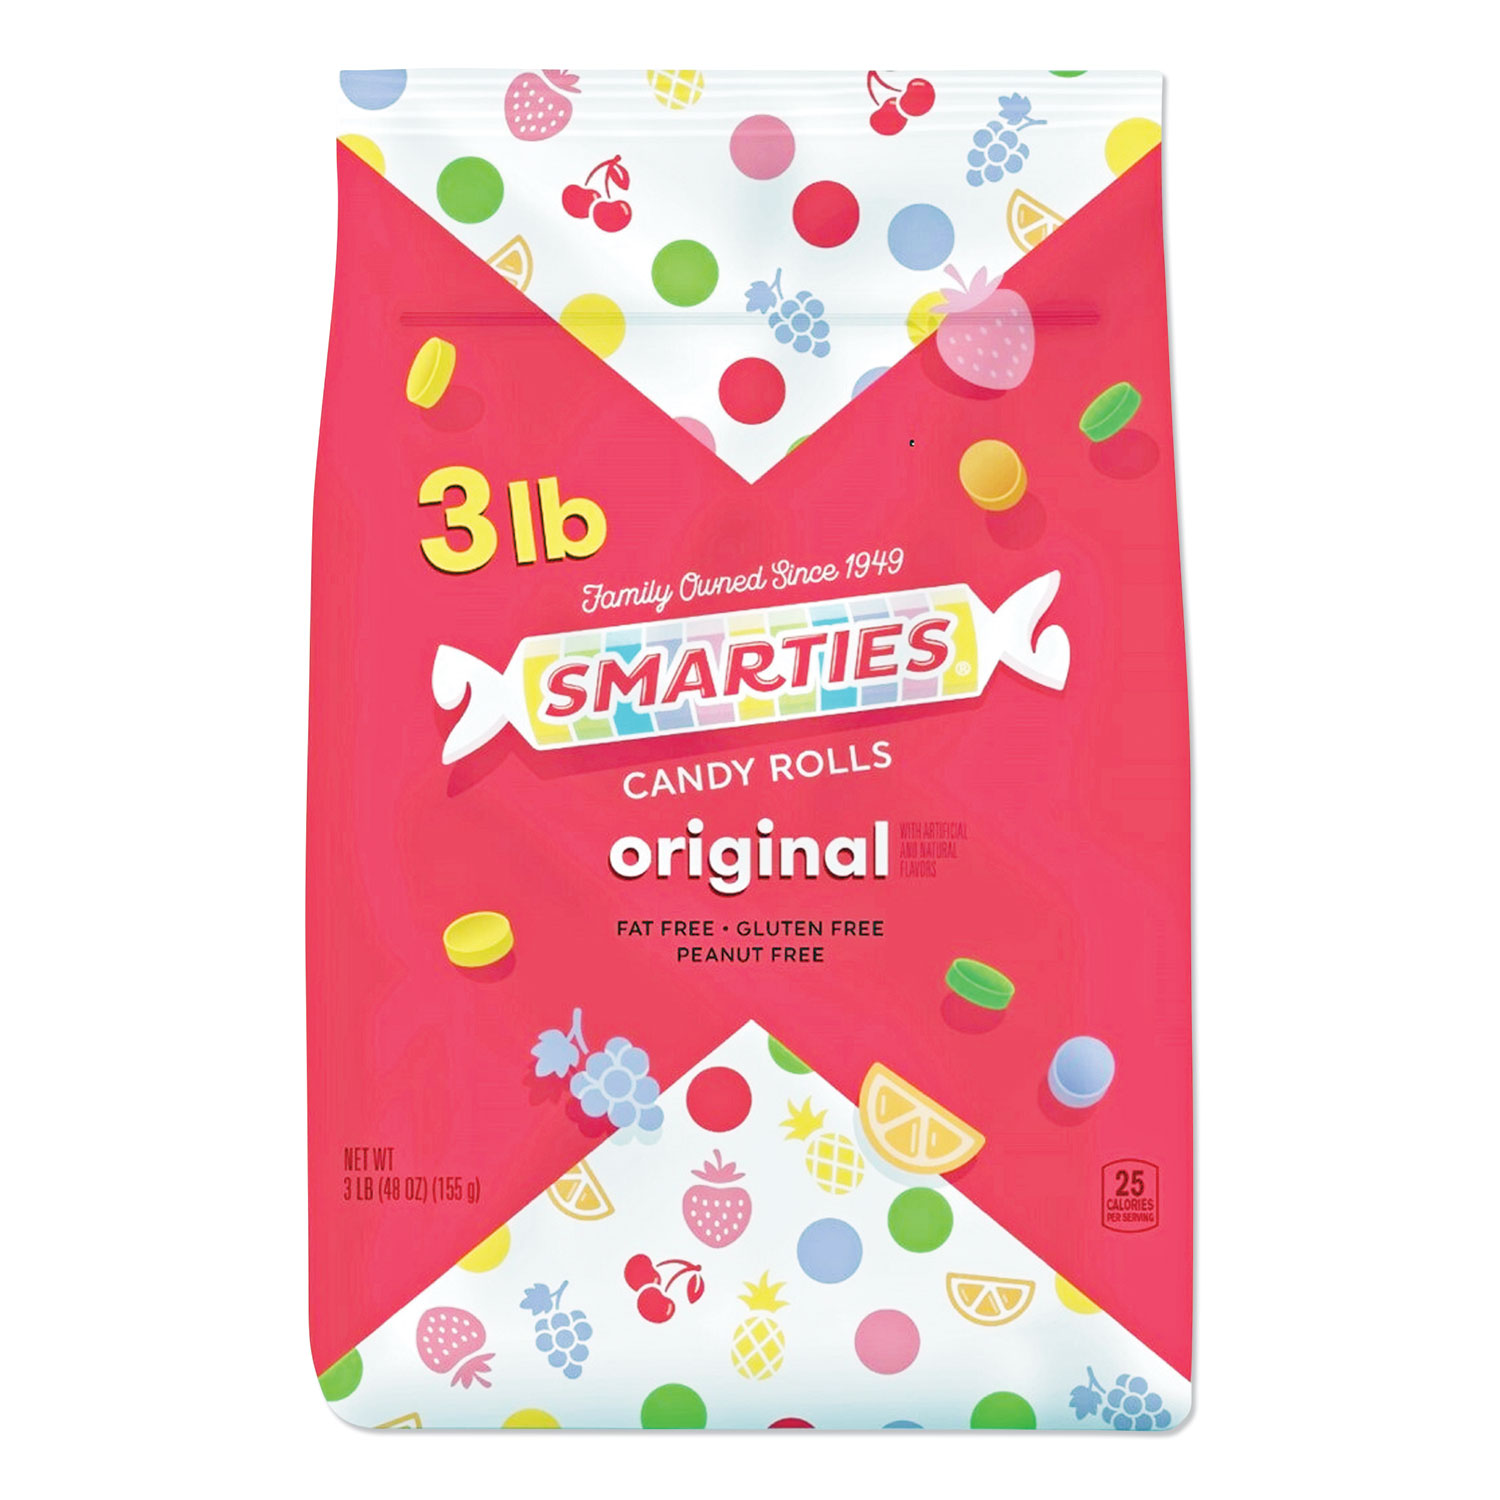  Spangler CDY00486 Smarties Candy, Assorted, 3 lb (NES2821212) 